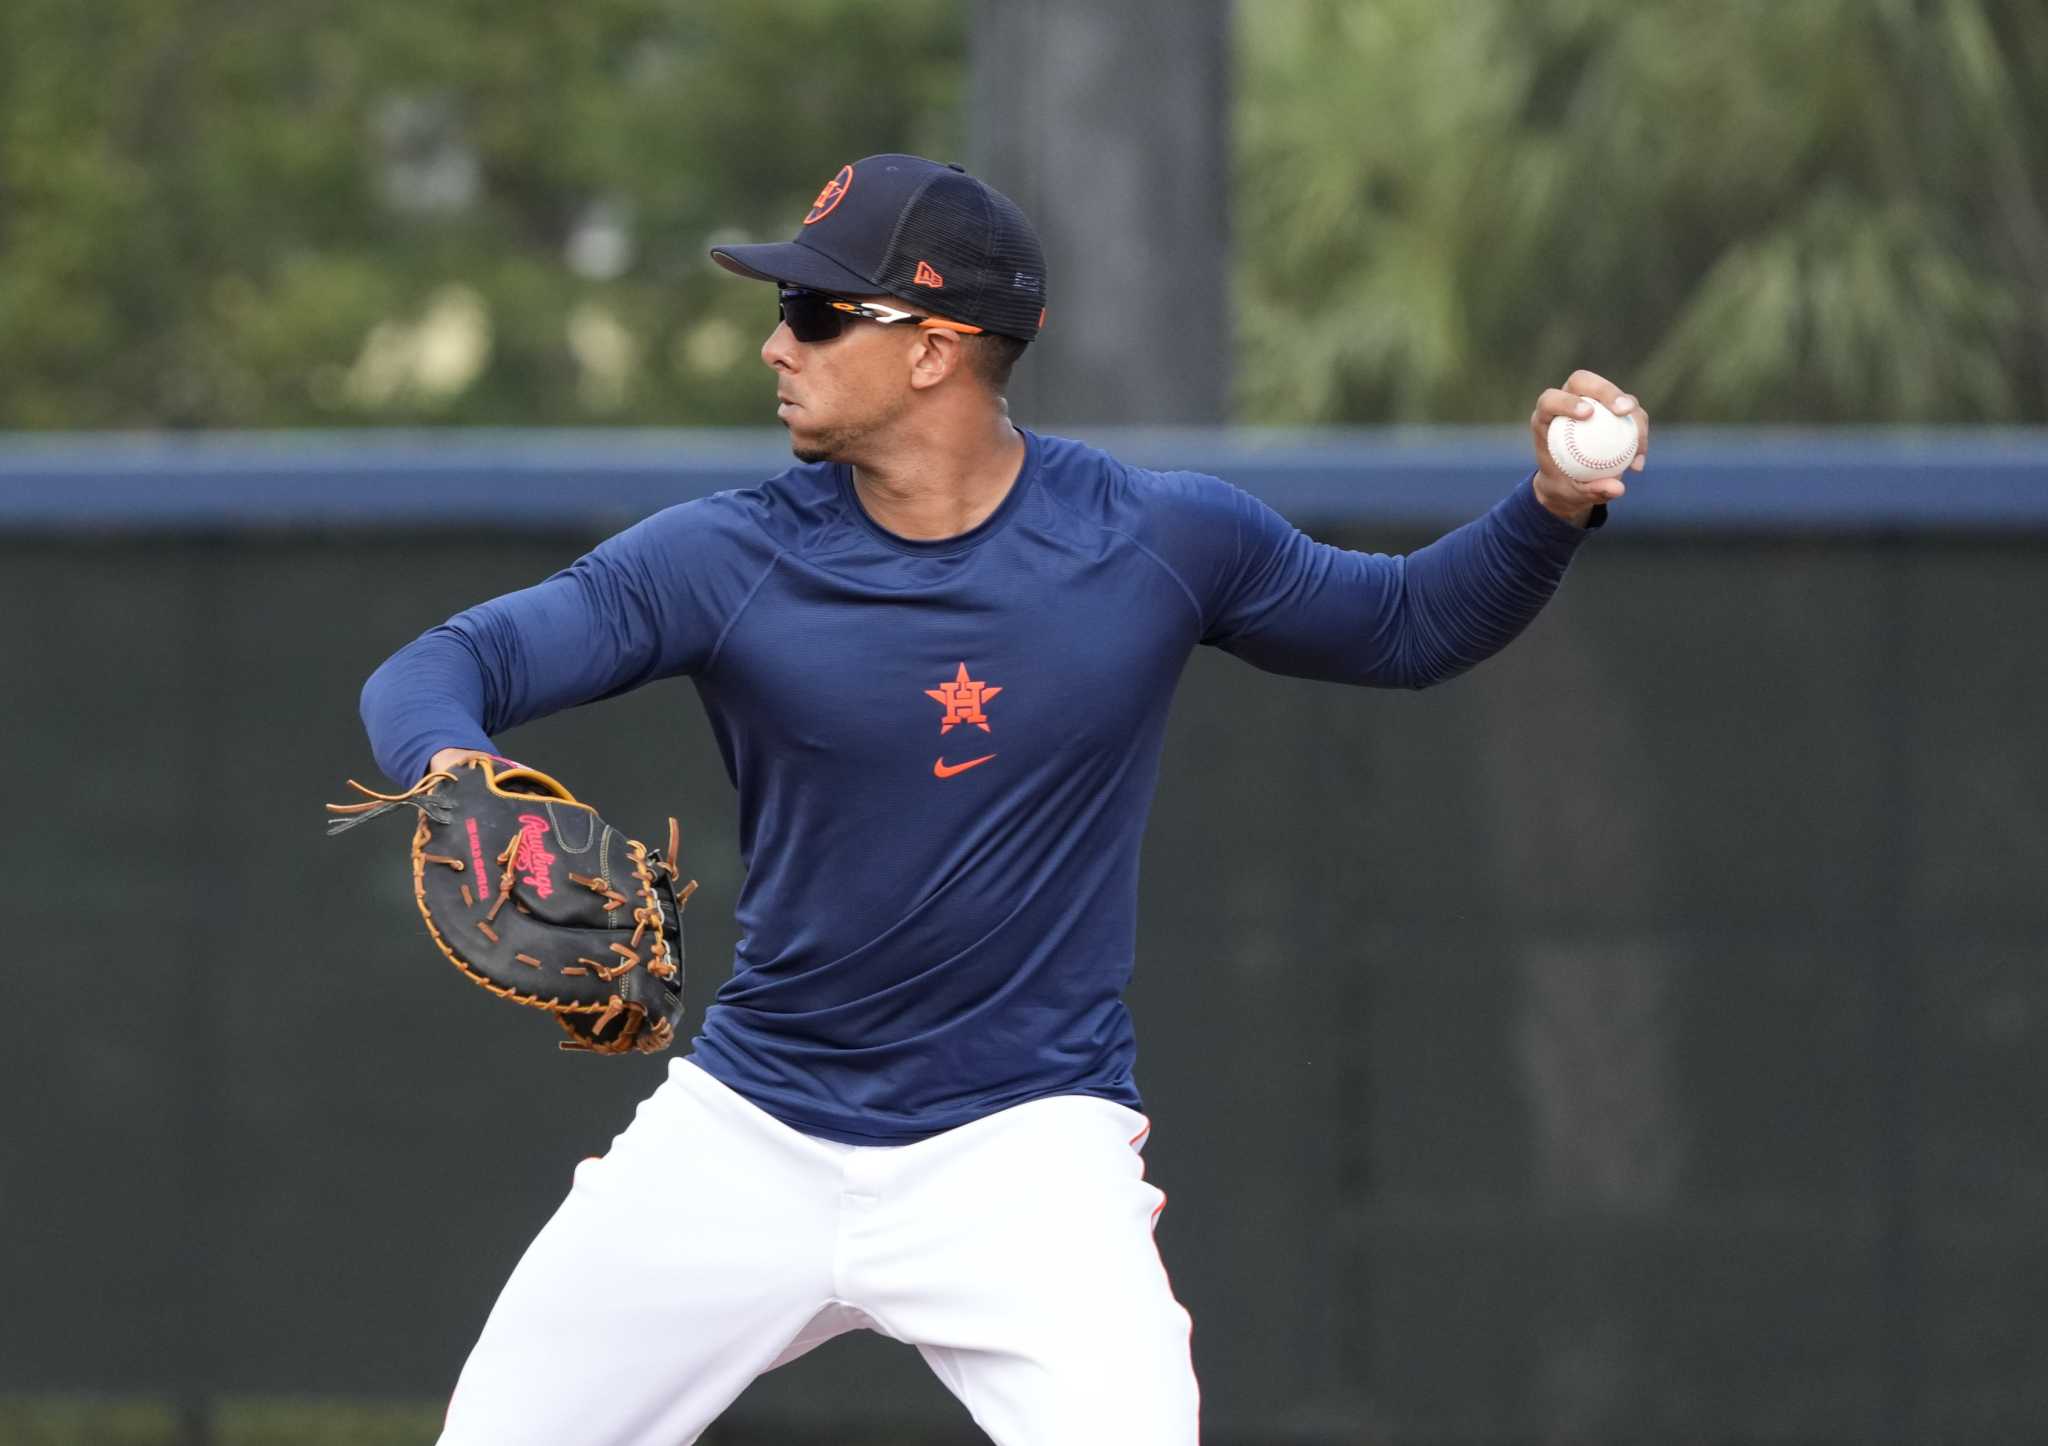 Astros' Michael Brantley joins Sugar Land Space Cowboys for rehab  assignment following shoulder surgery